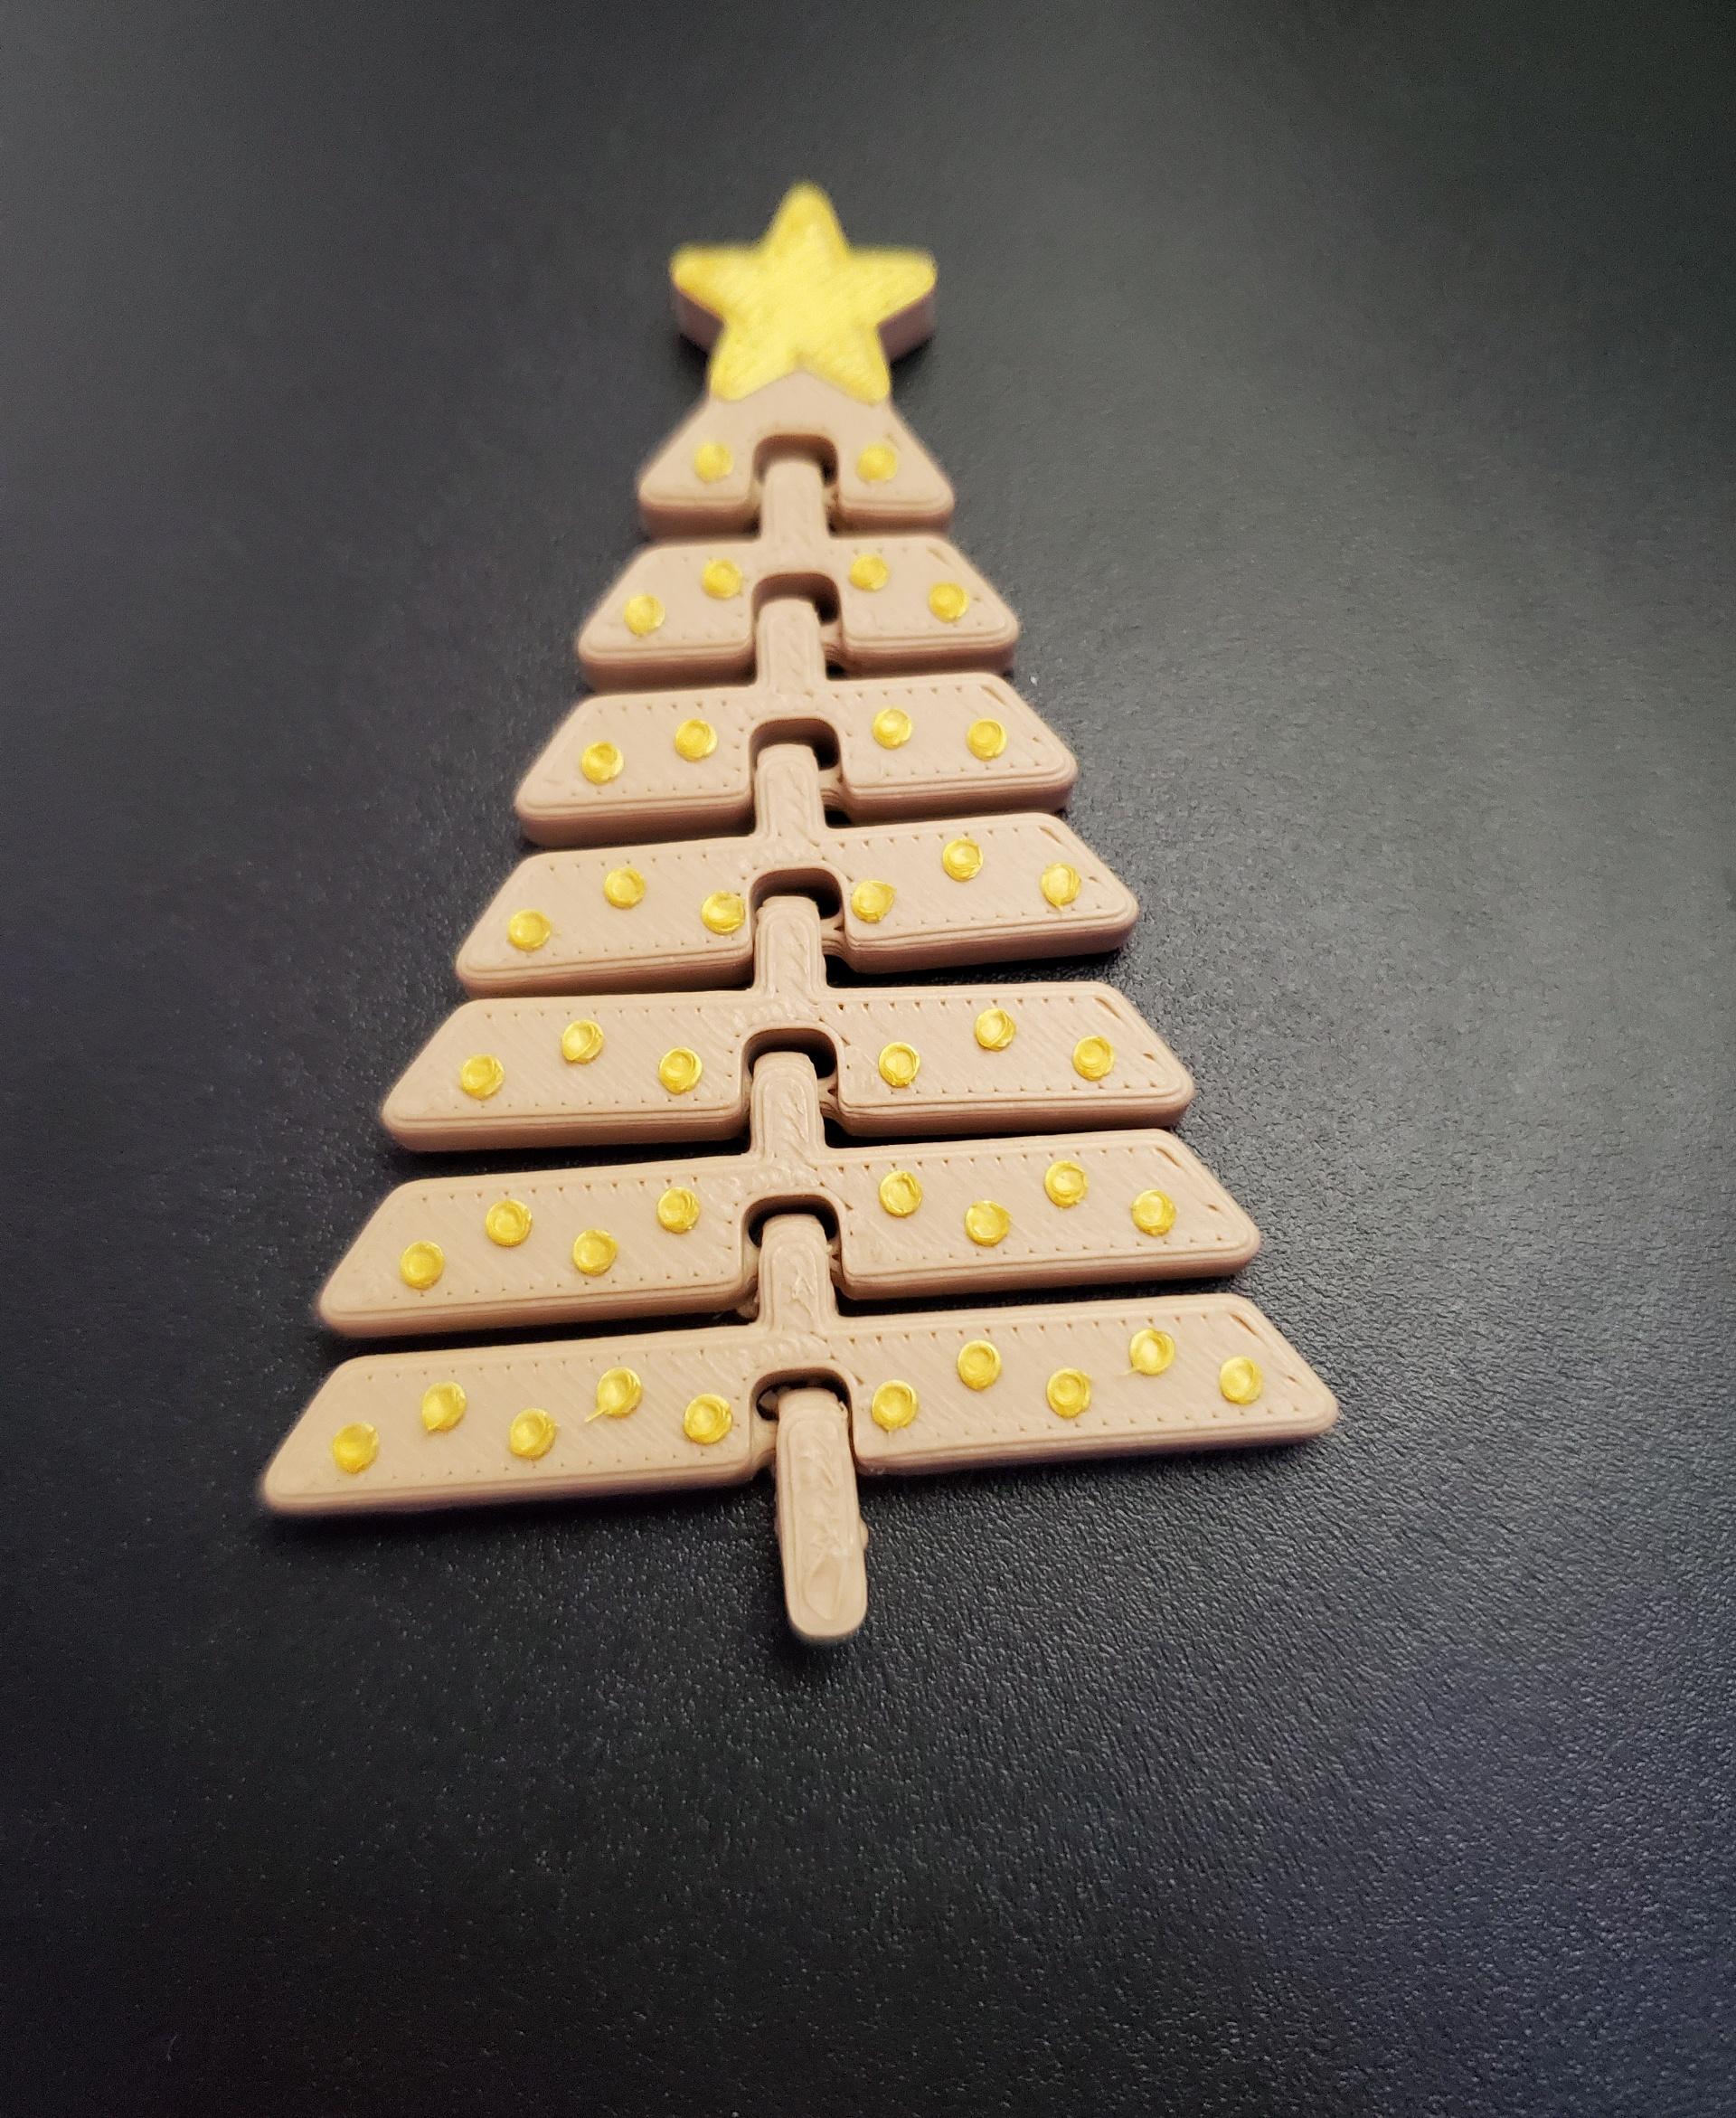 Articulated Christmas Tree with Star and Ornaments - Print in place fidget toys - 3mf - polyterra peanut - 3d model